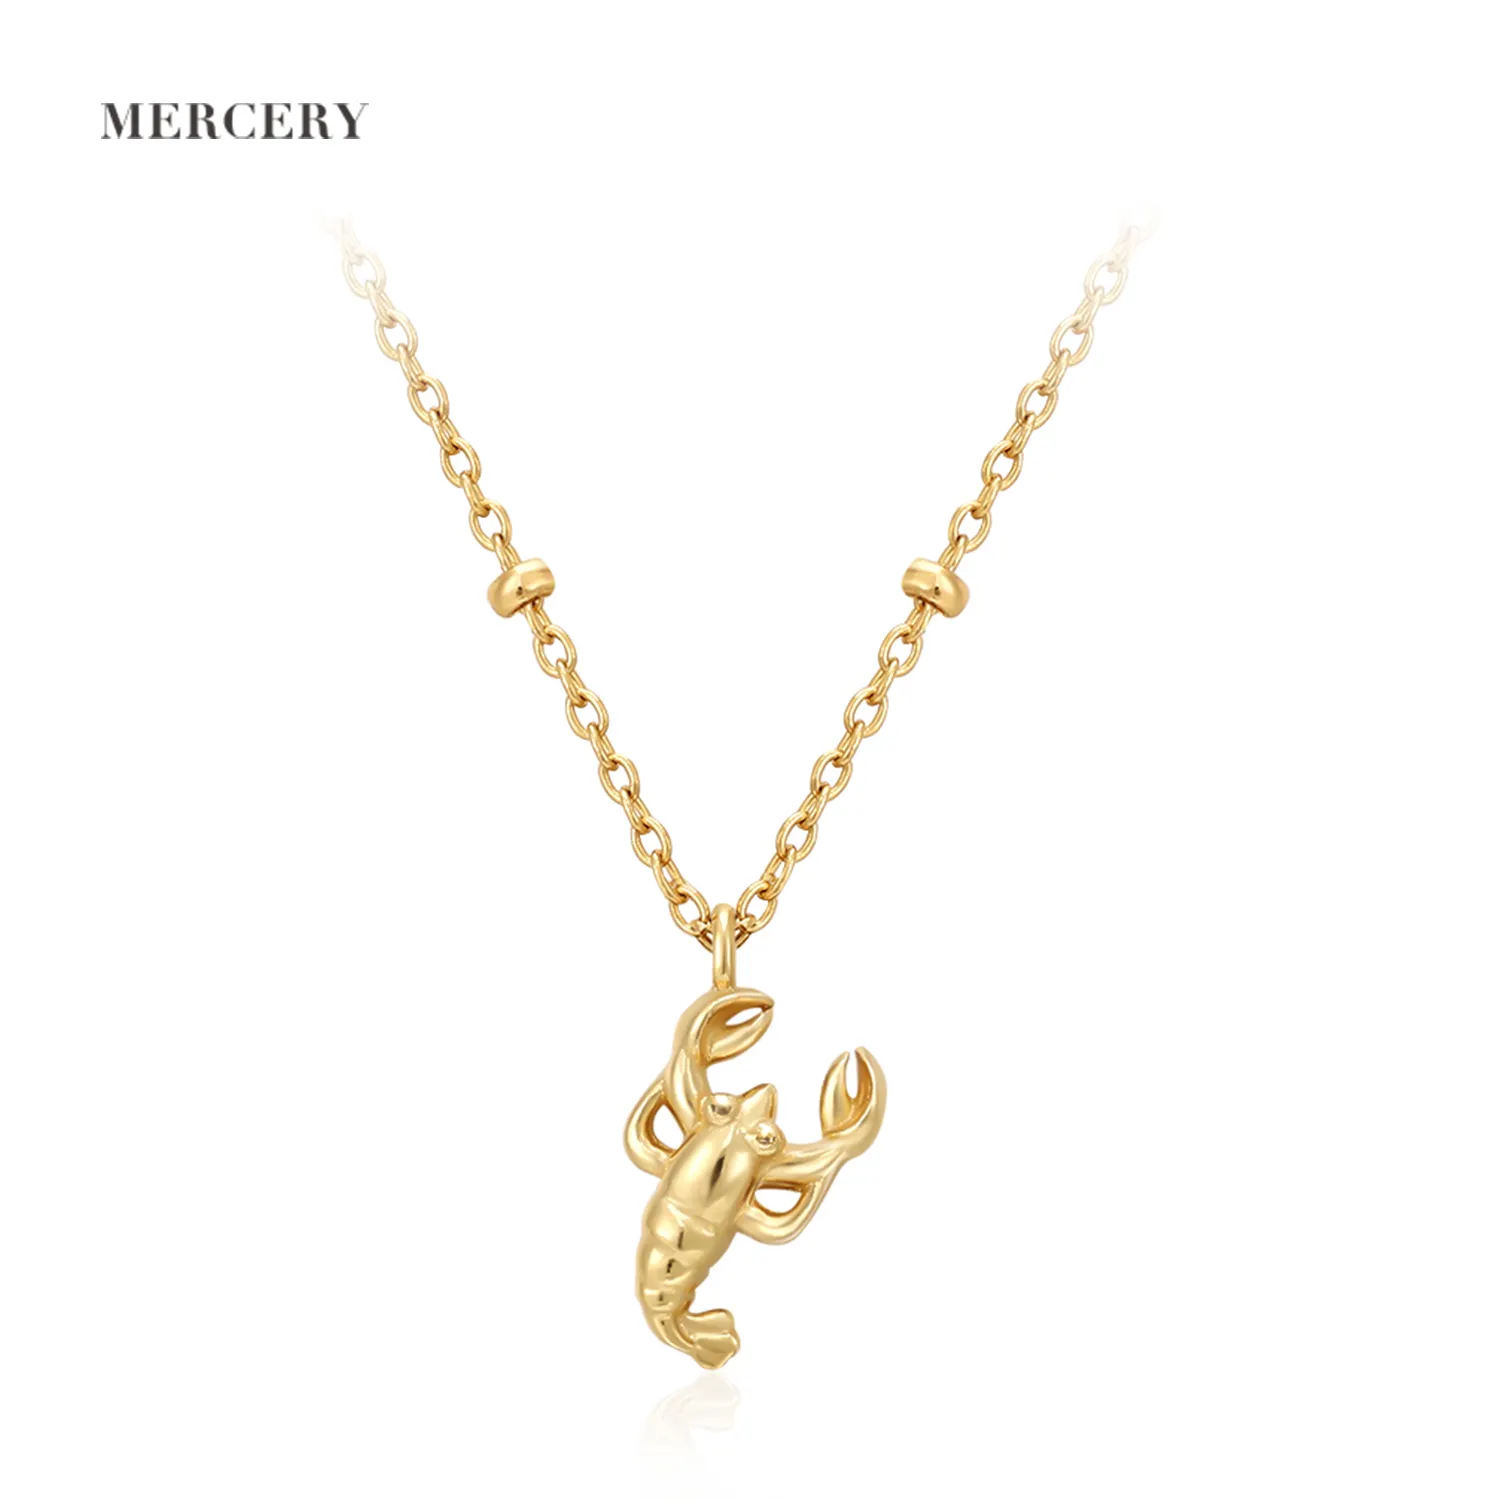 Mercery Sea Fashion Jewellery Fine Jewelry 925 Sterling Silver Necklace 14K Gold Plated Jewelry Animal Charm Necklace For Women